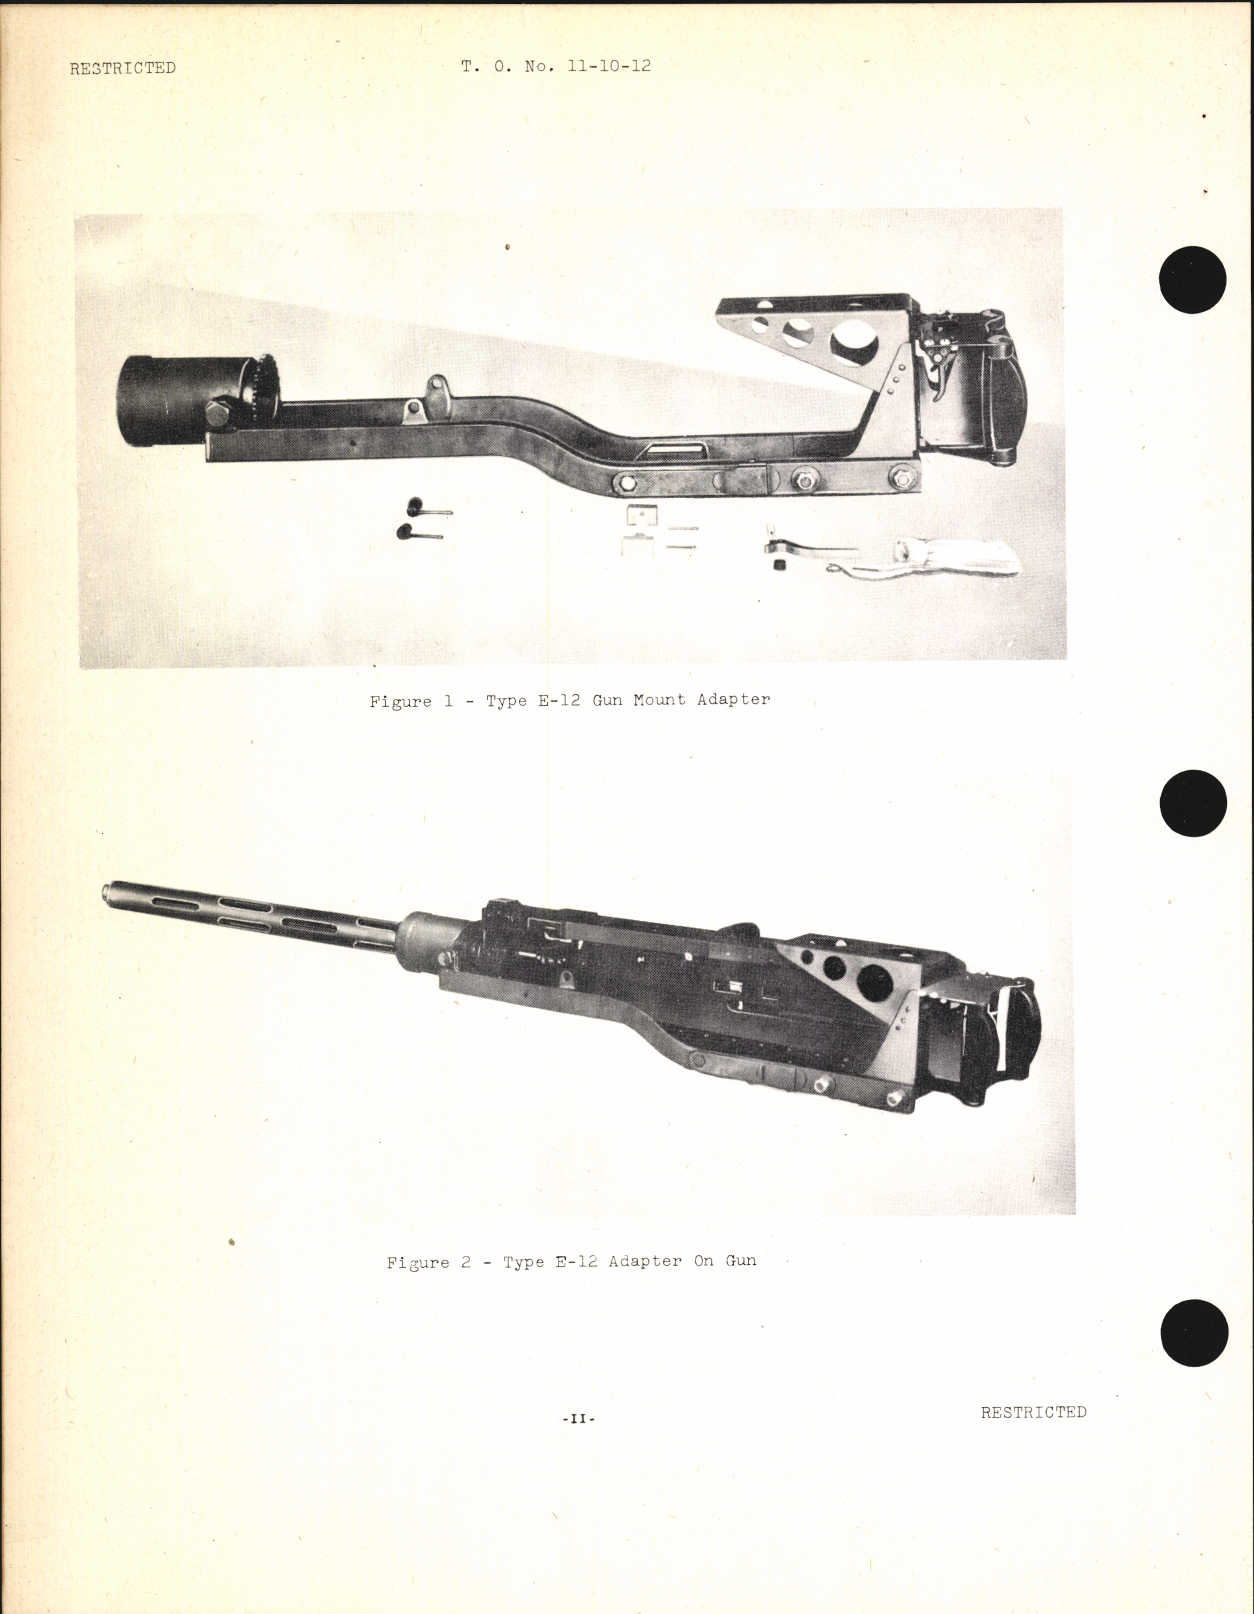 Sample page 6 from AirCorps Library document: Handbook of Instructions with Parts Catalog for Type E-12 Gun Mount Adapter